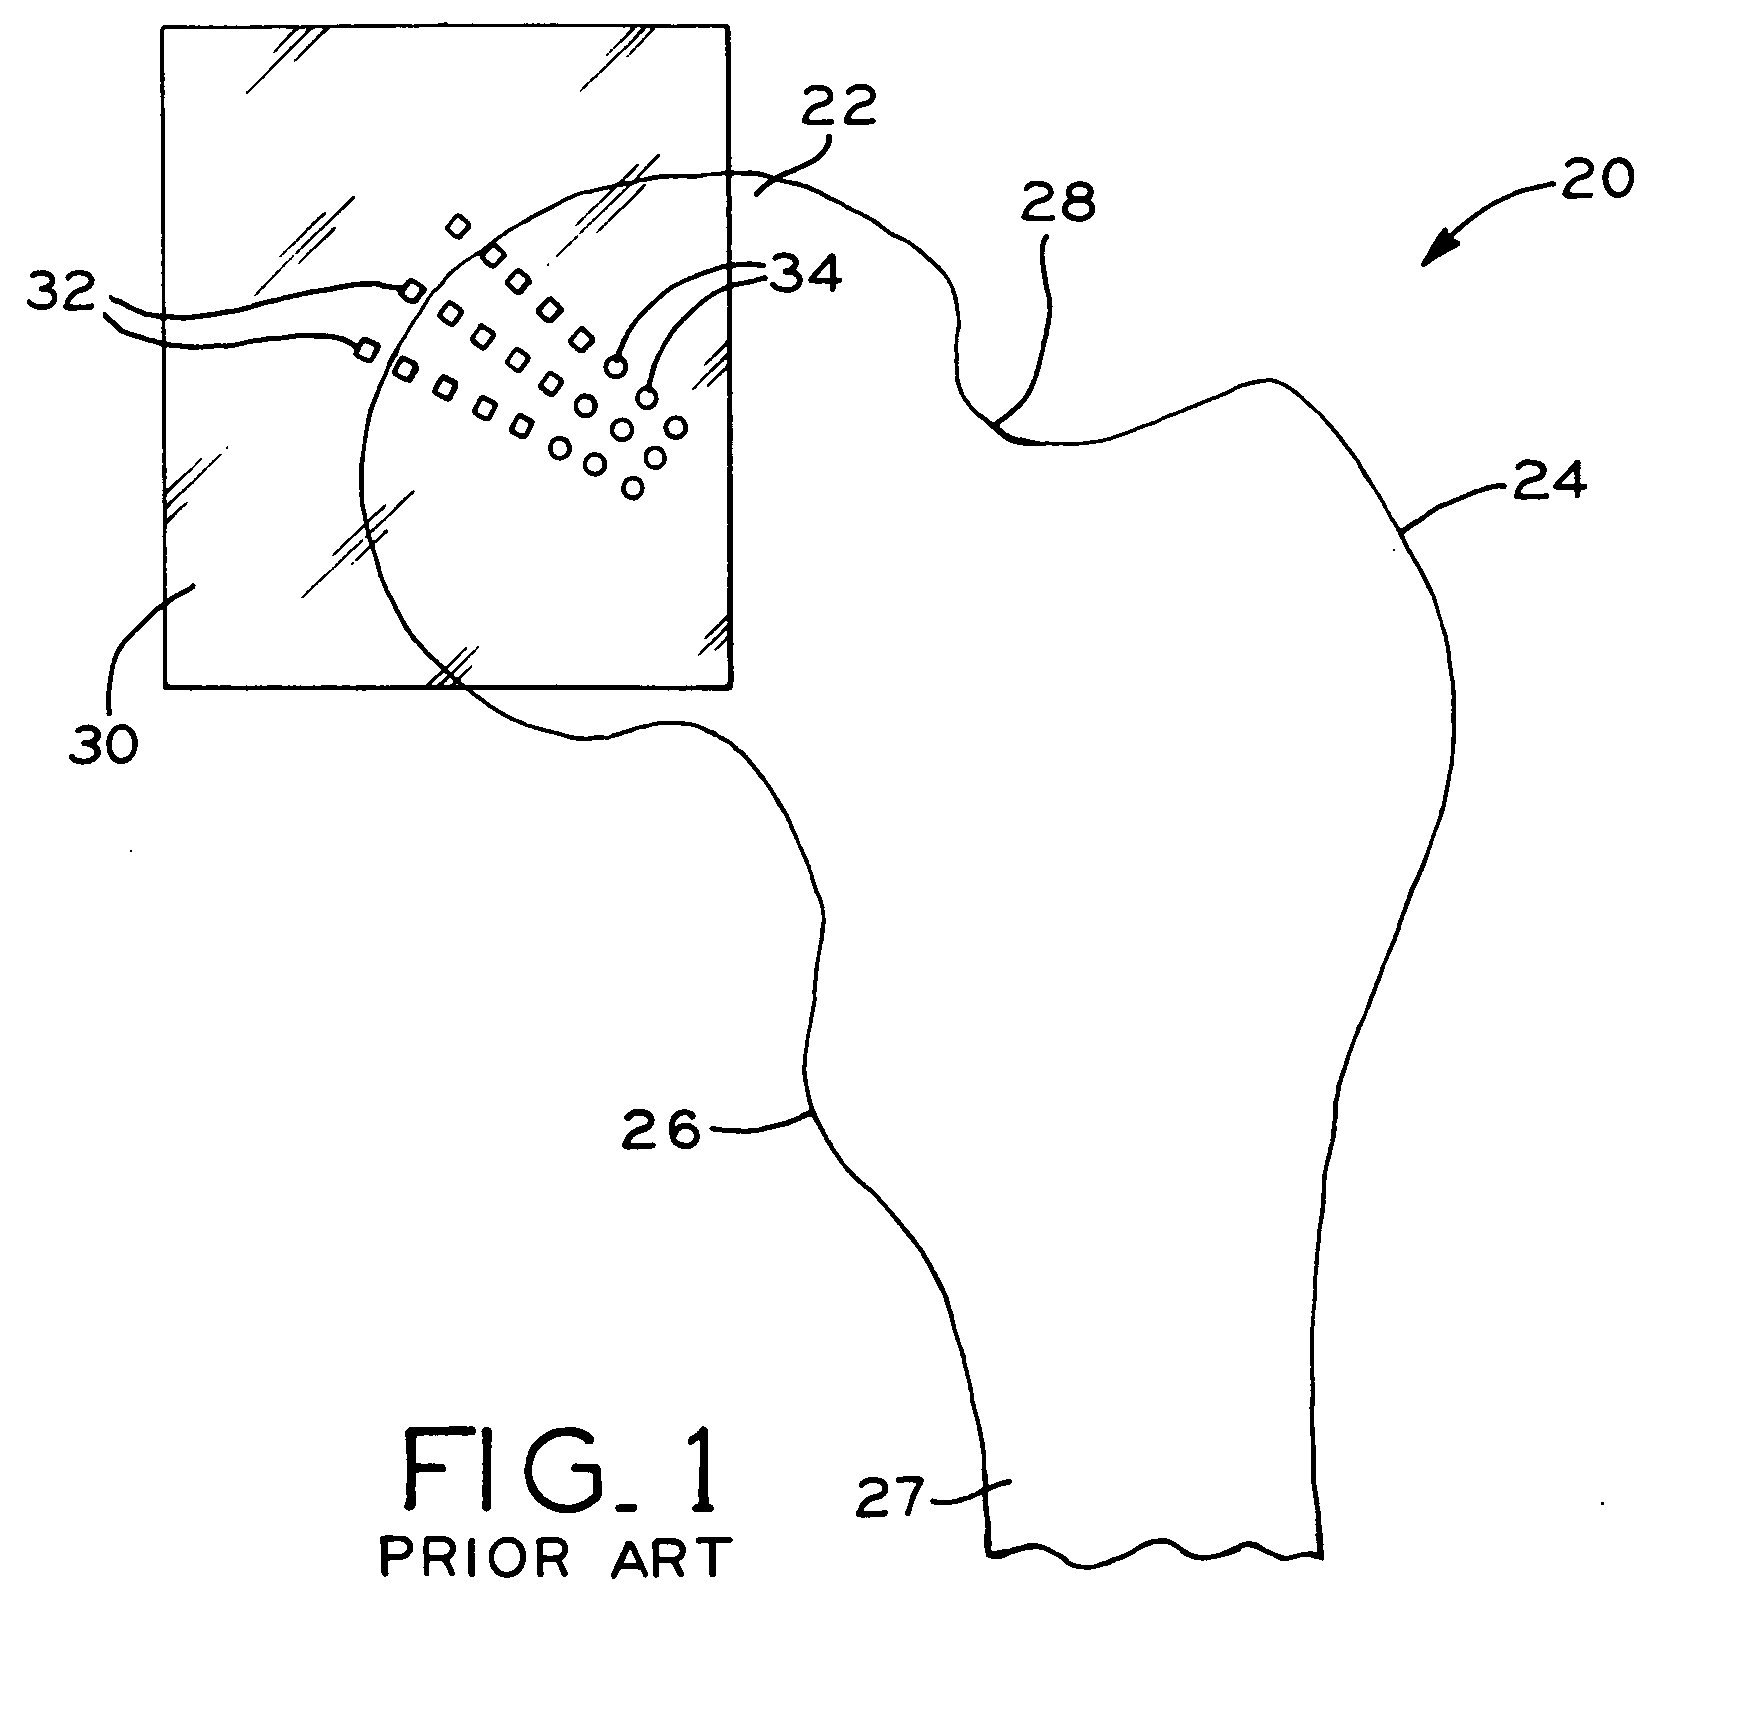 Method for selecting modular implant components